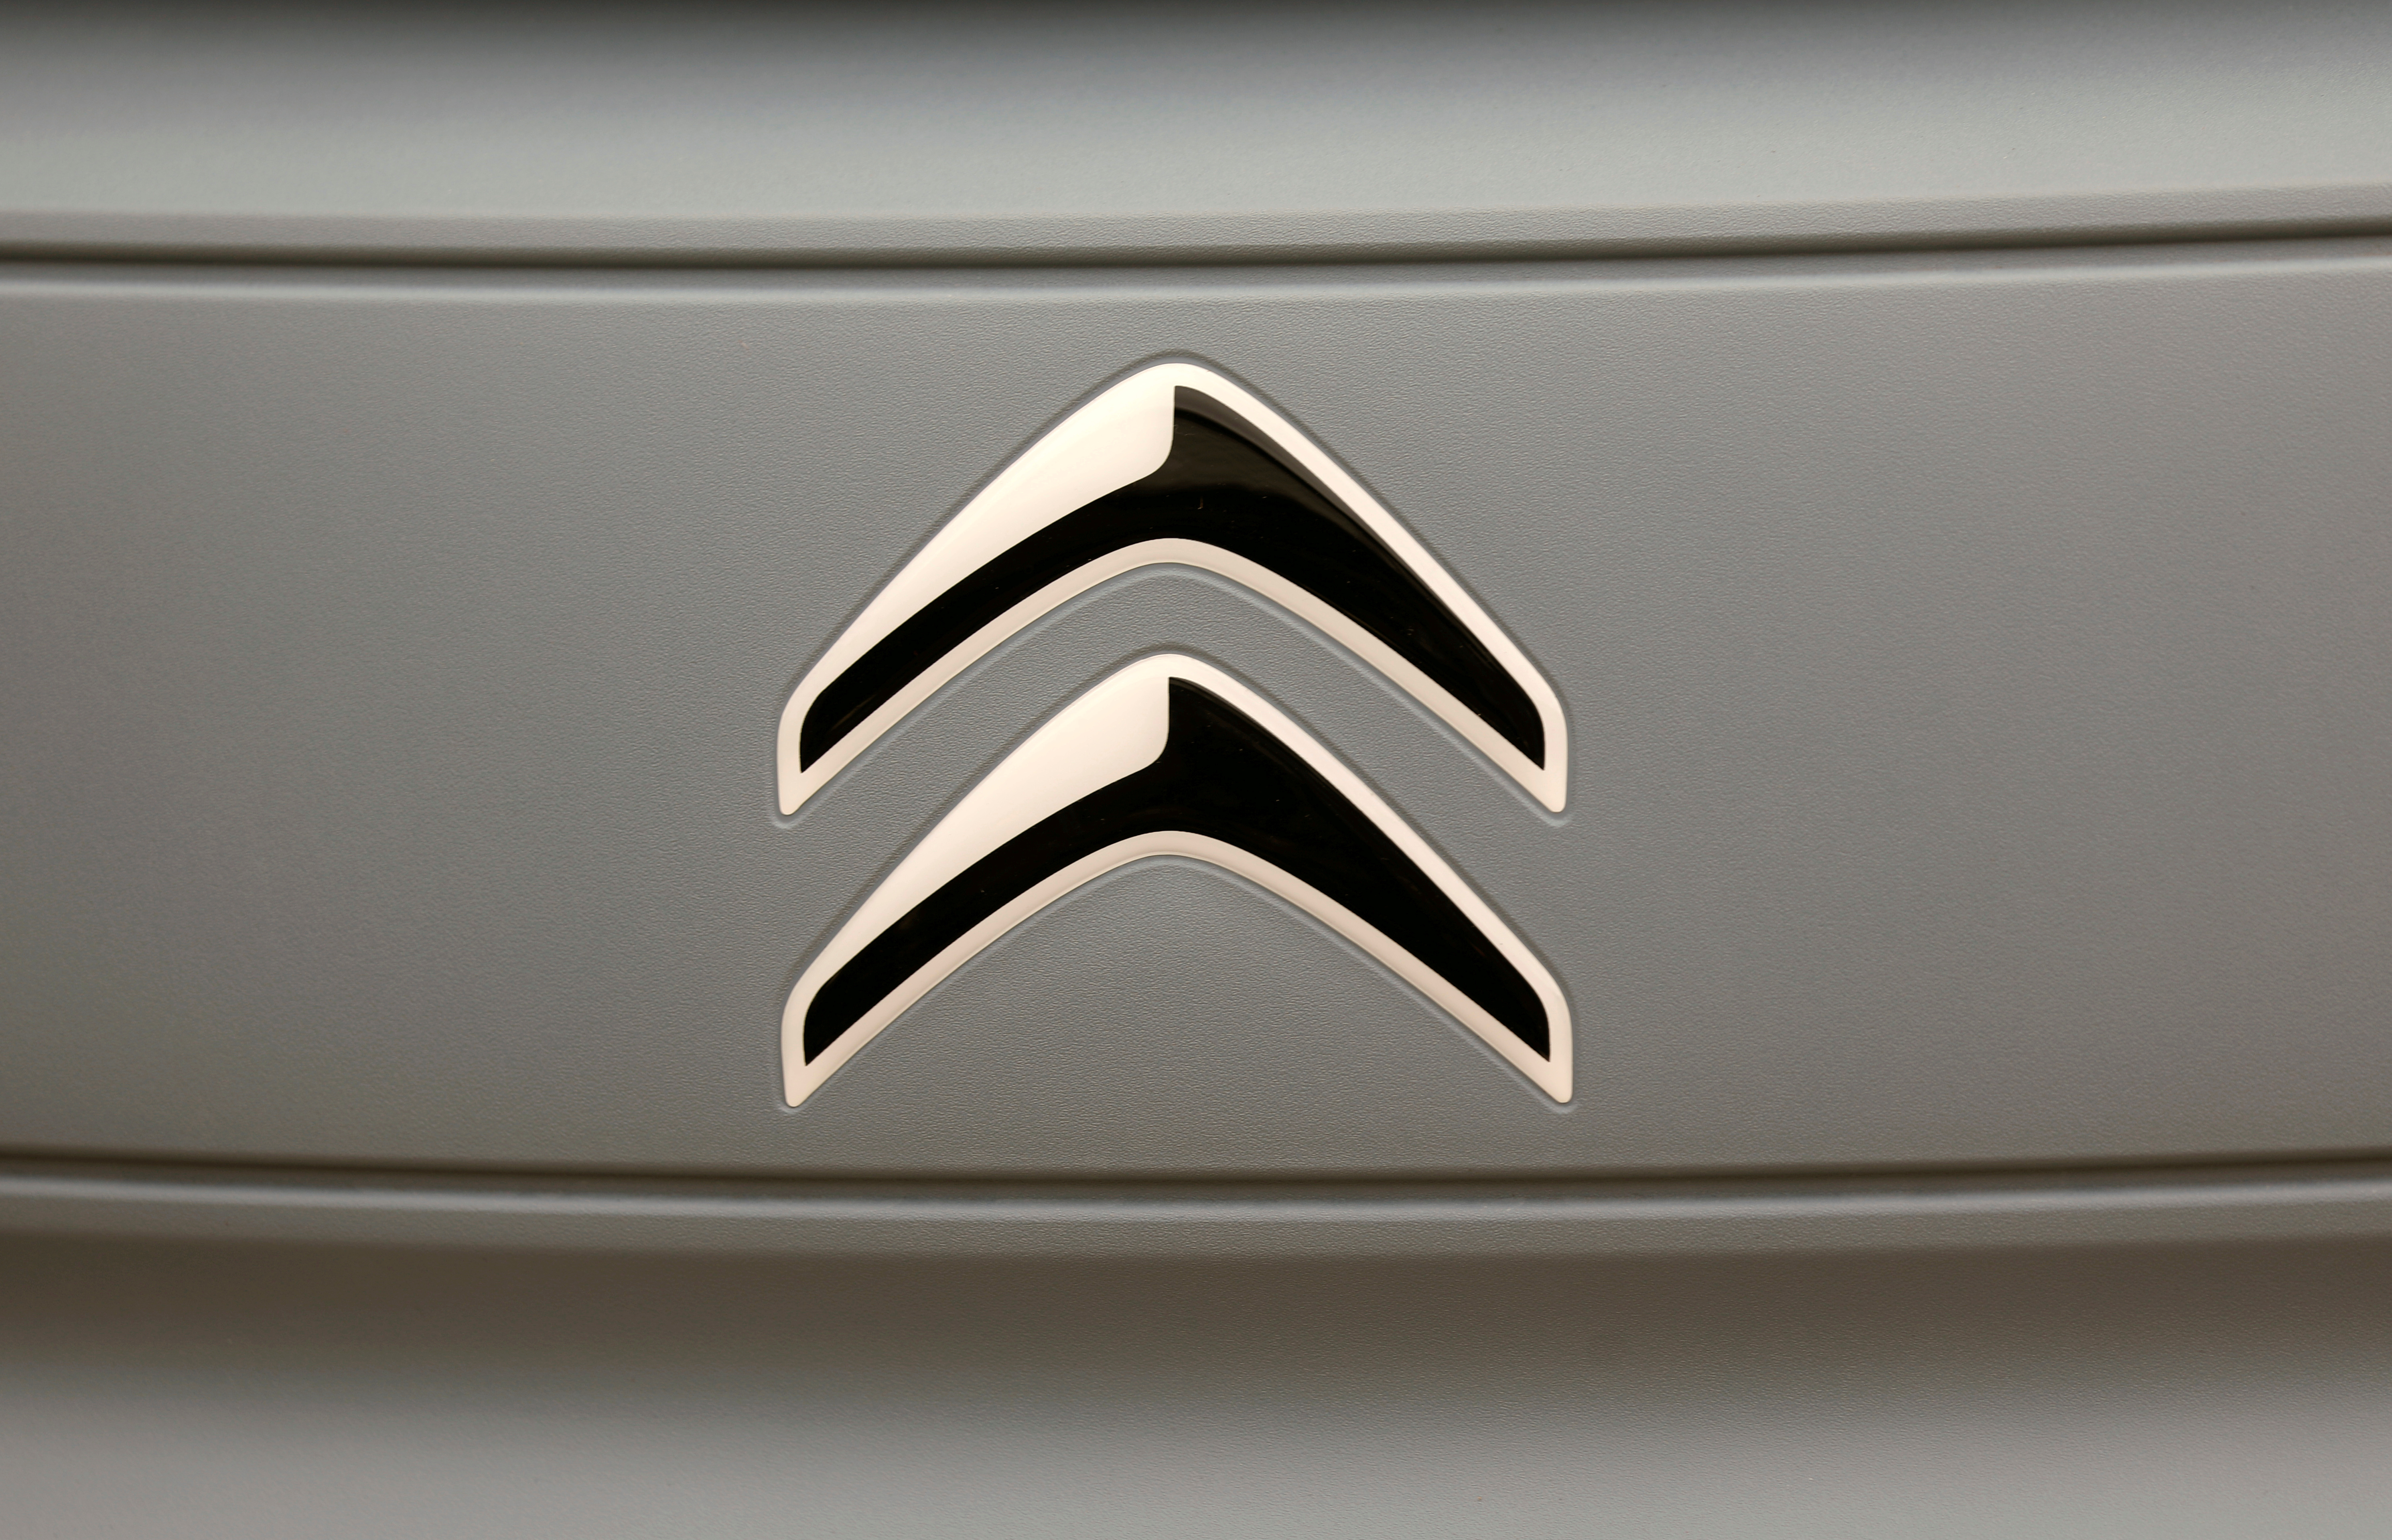 The logo of Citroen is seen on a new electric car AMI during a media presentation in Paris